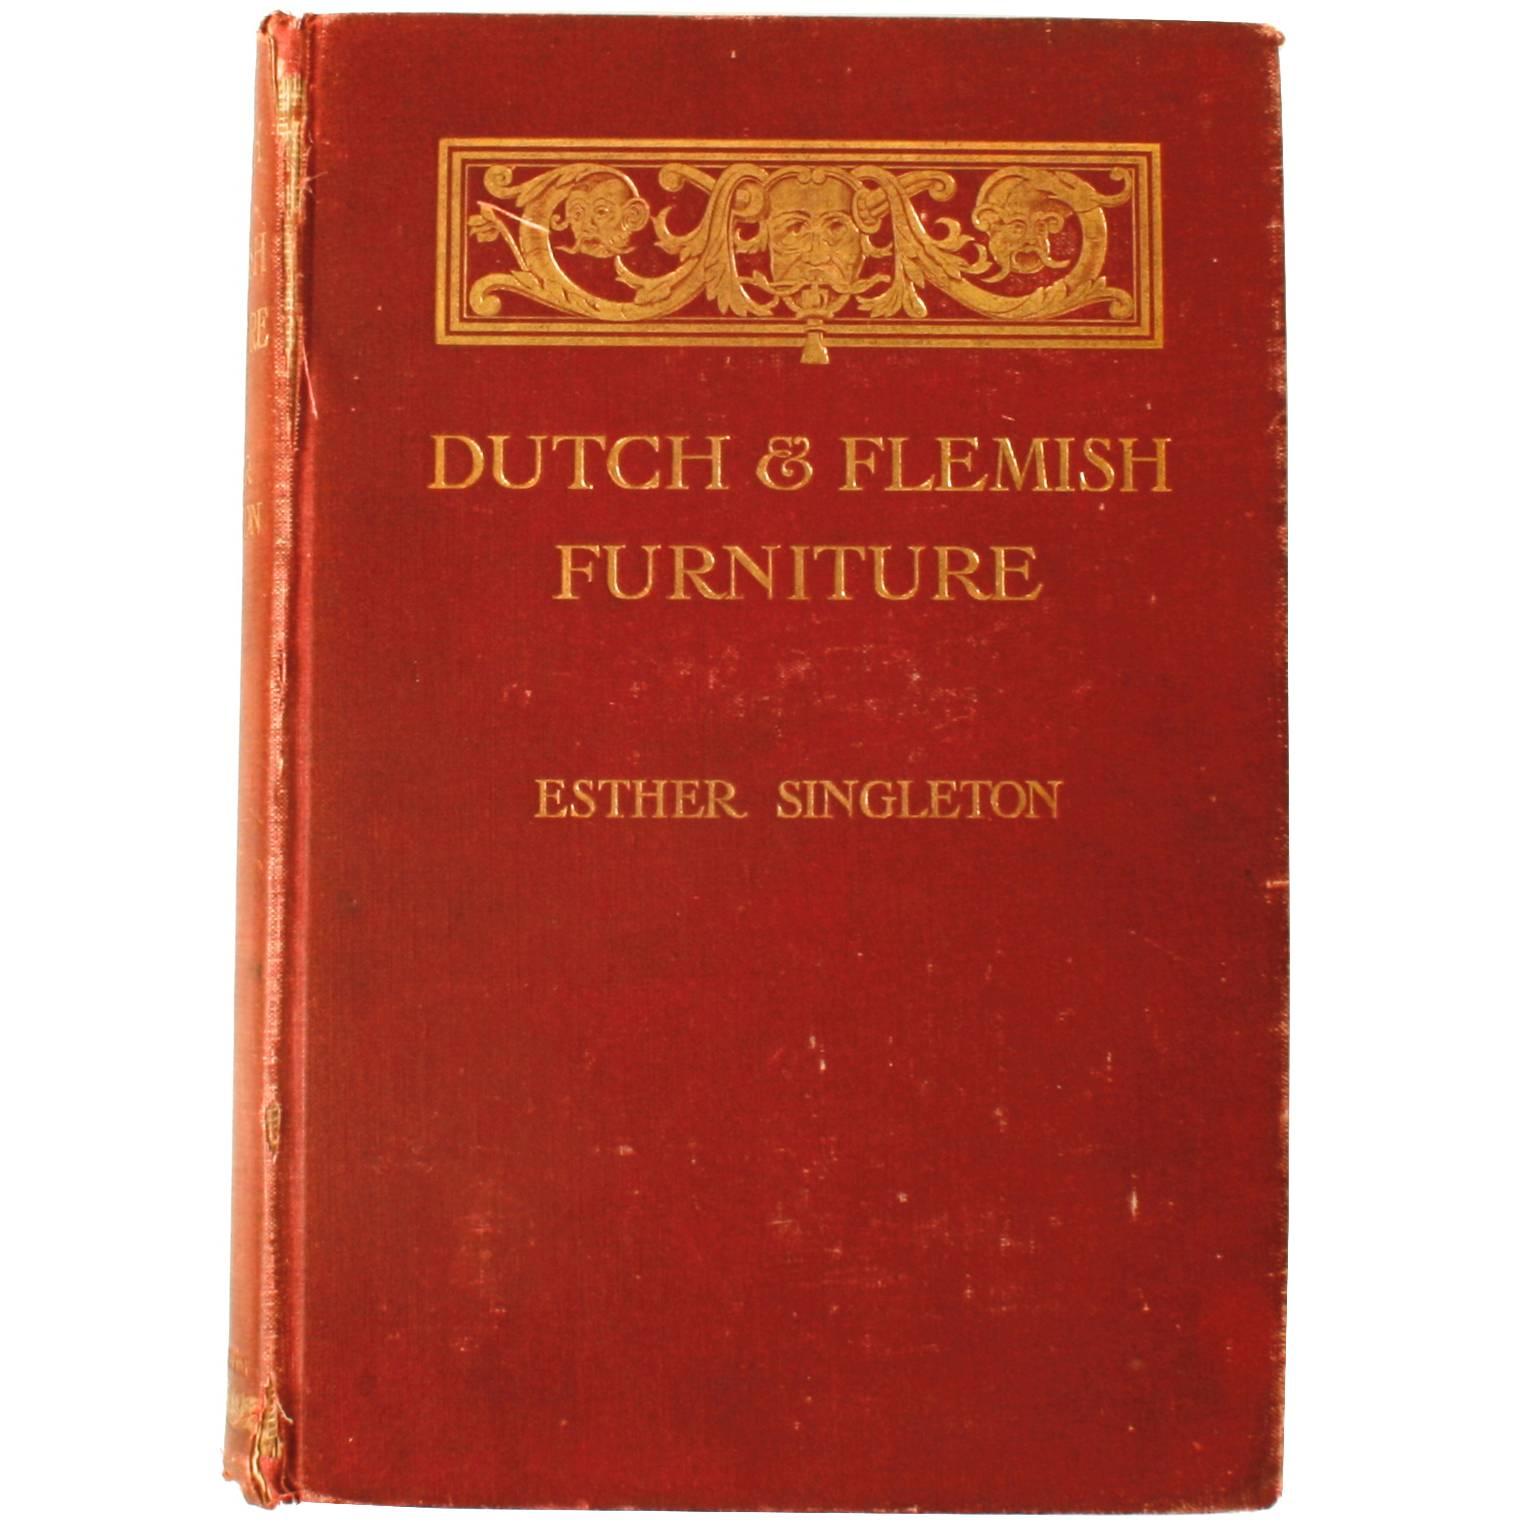 Dutch and Flemish Furniture by Esther Singleton, First Edition